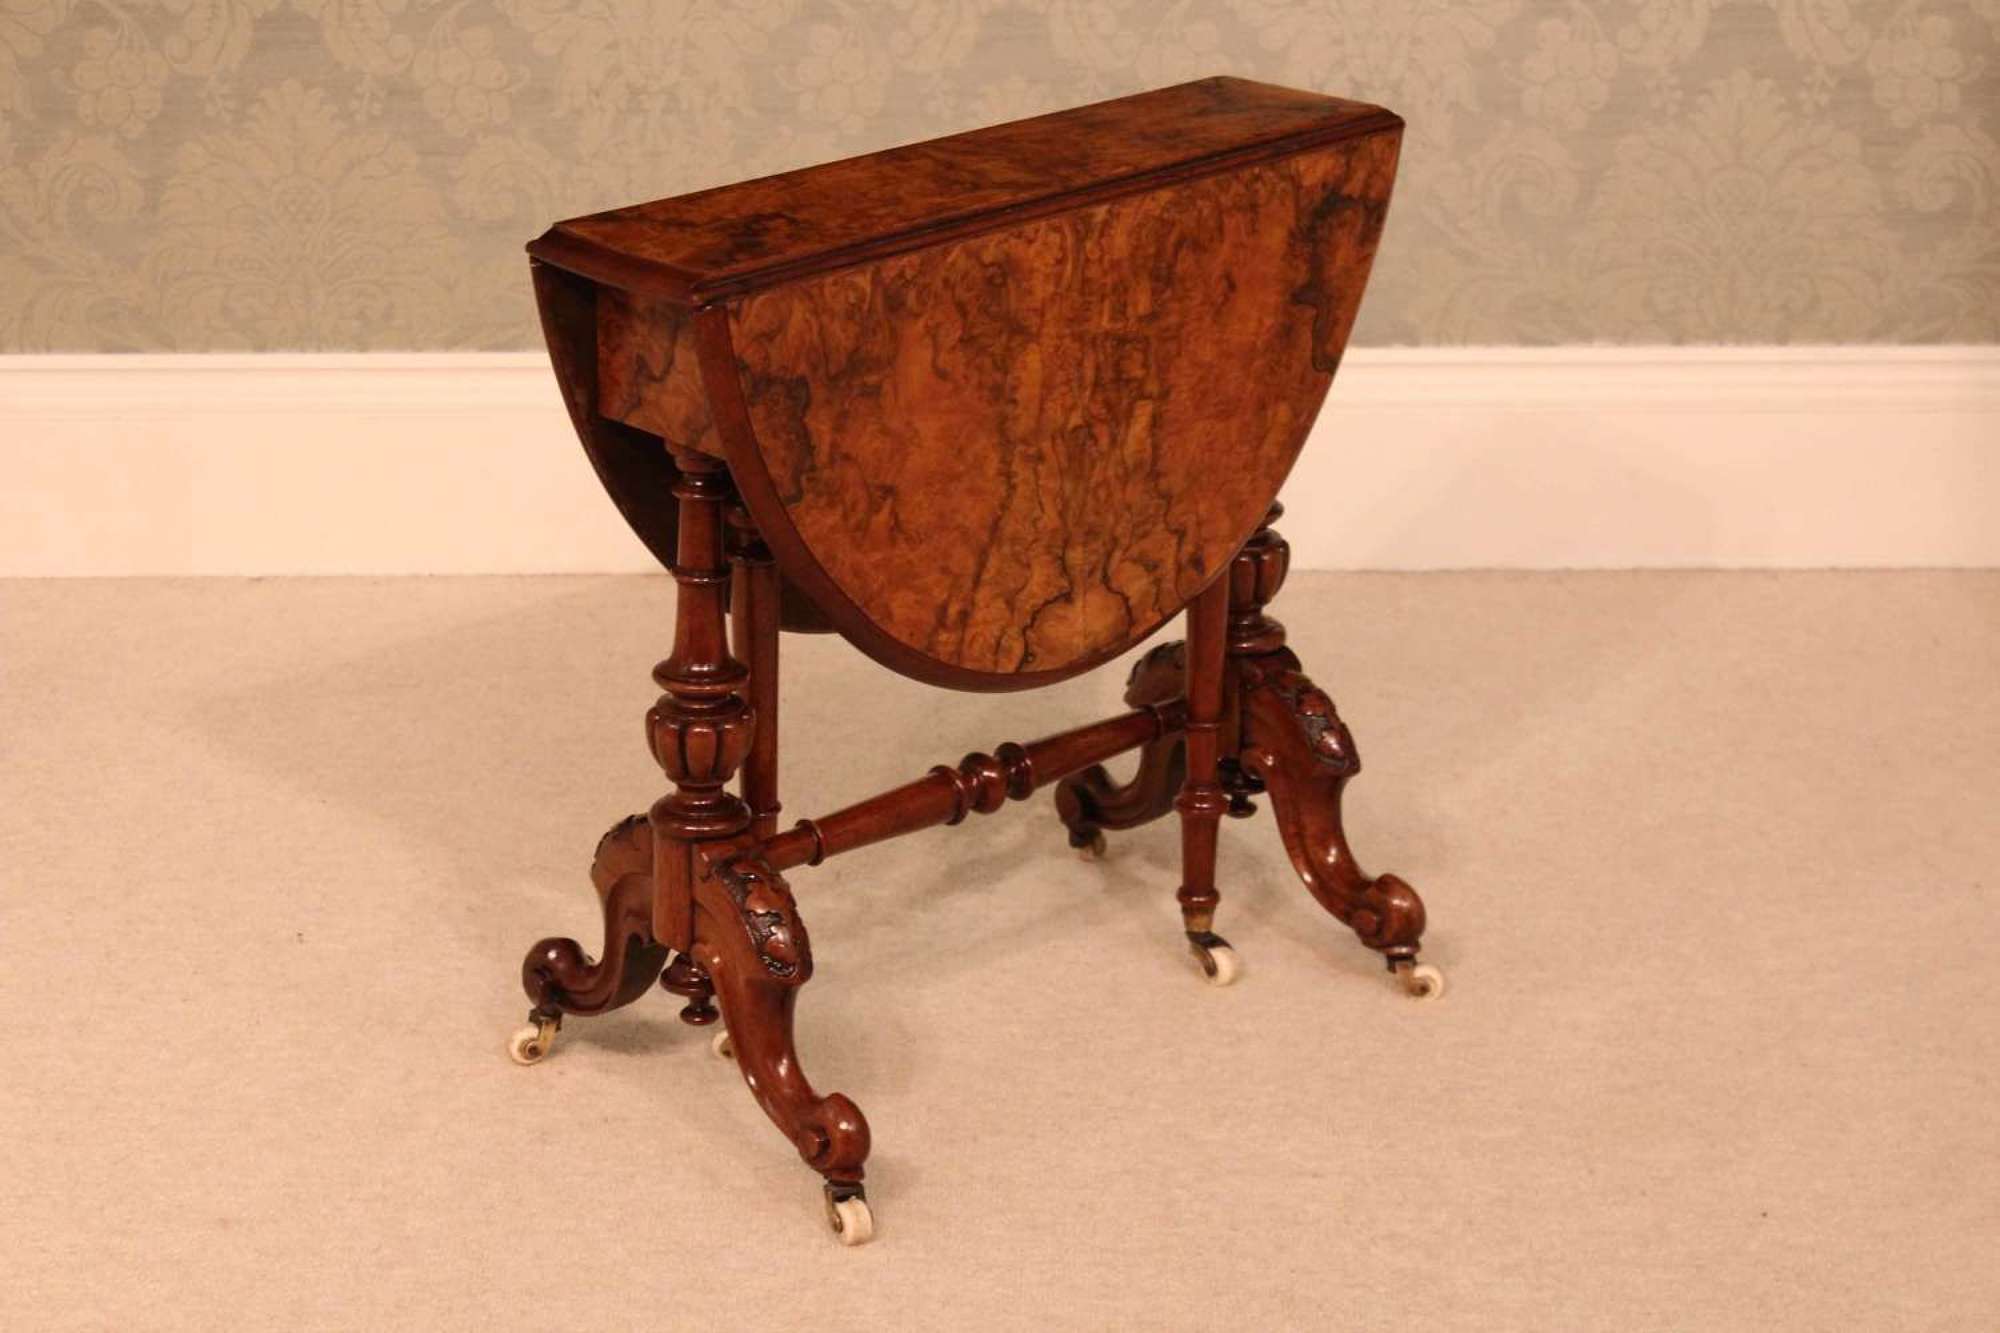 An Exquisite Victorian Burr Walnut Cabriole Leg Baby Sutherland Table